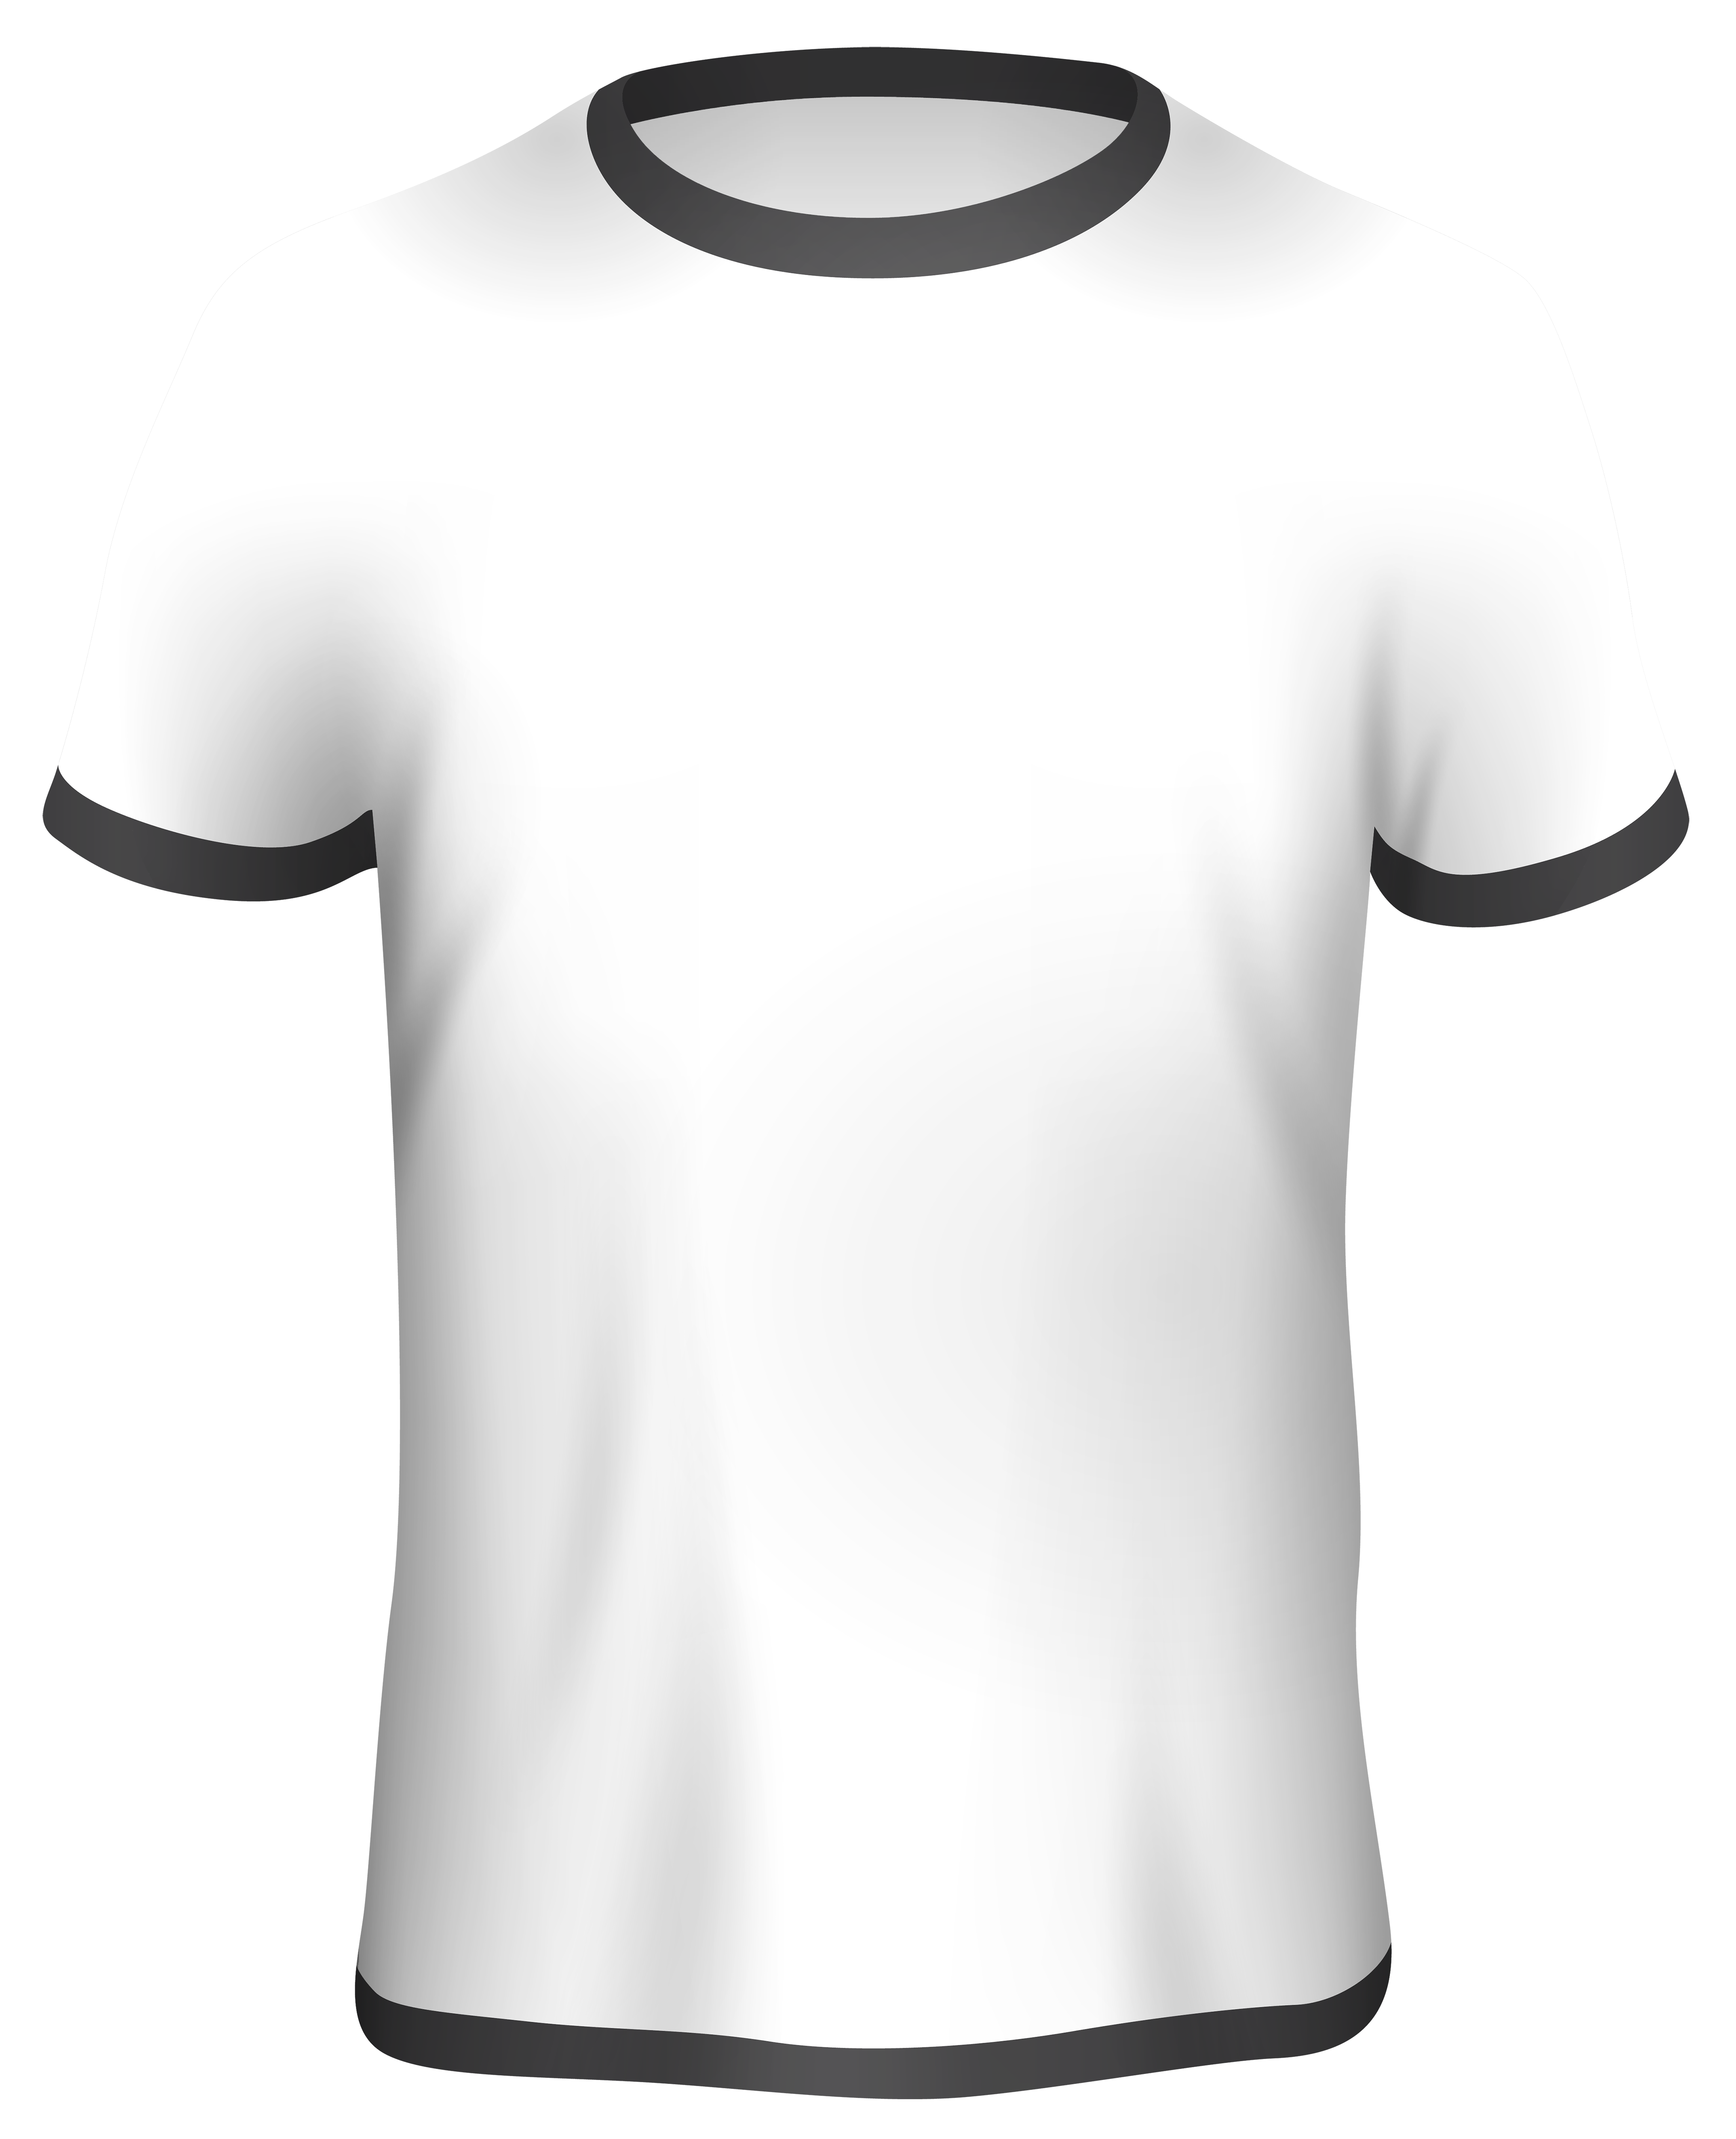 Male White Shirt PNG  Clipart Best WEB Clipart